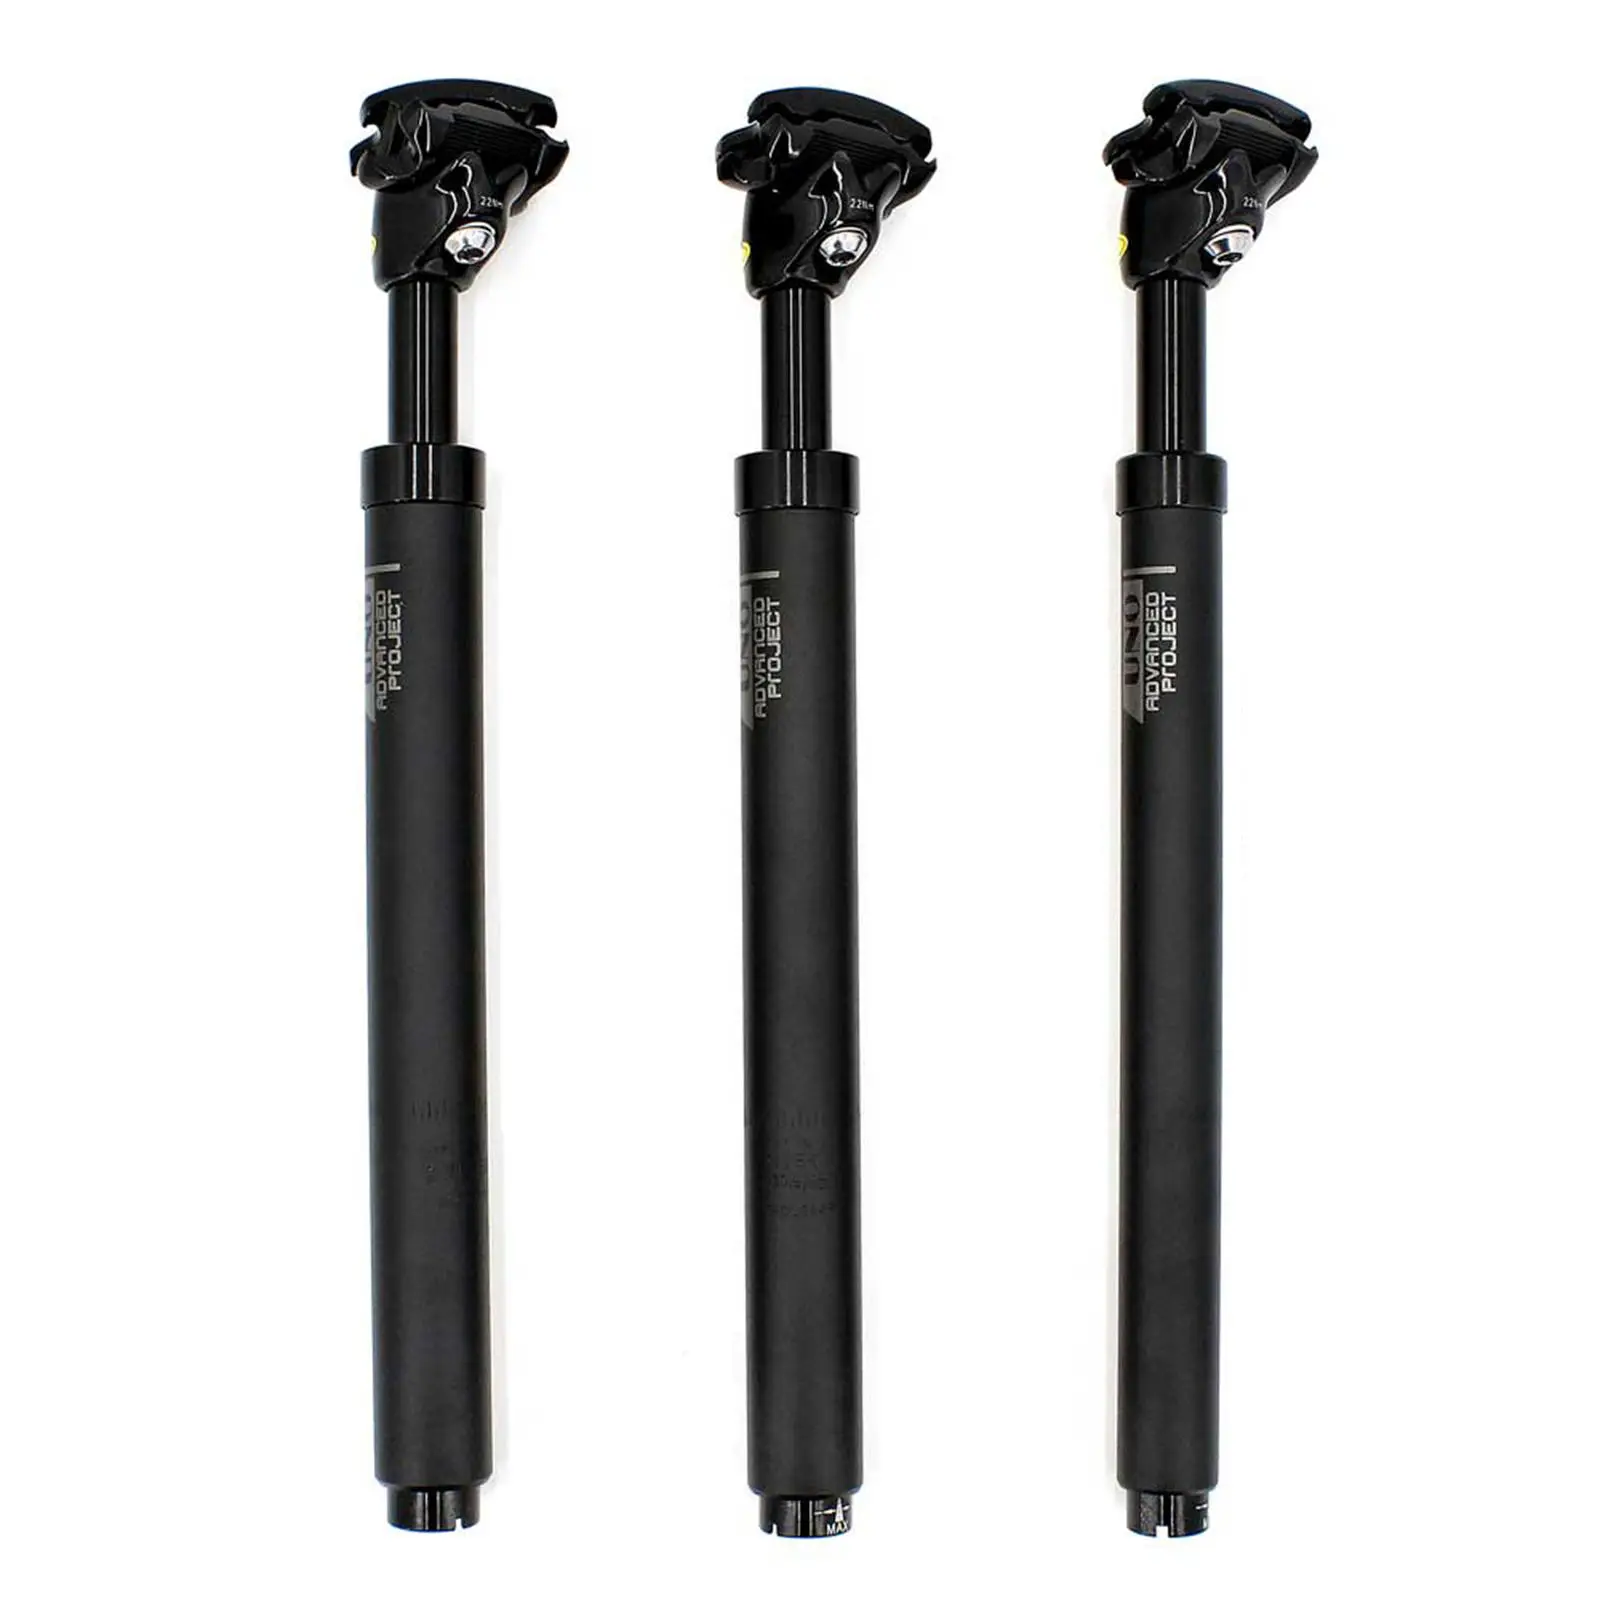 

350mm Durable Bike Seatpost Bicycle Seat Post Saddle Support Tube Pillar Cycle Replace Components Shockproof Support Pole